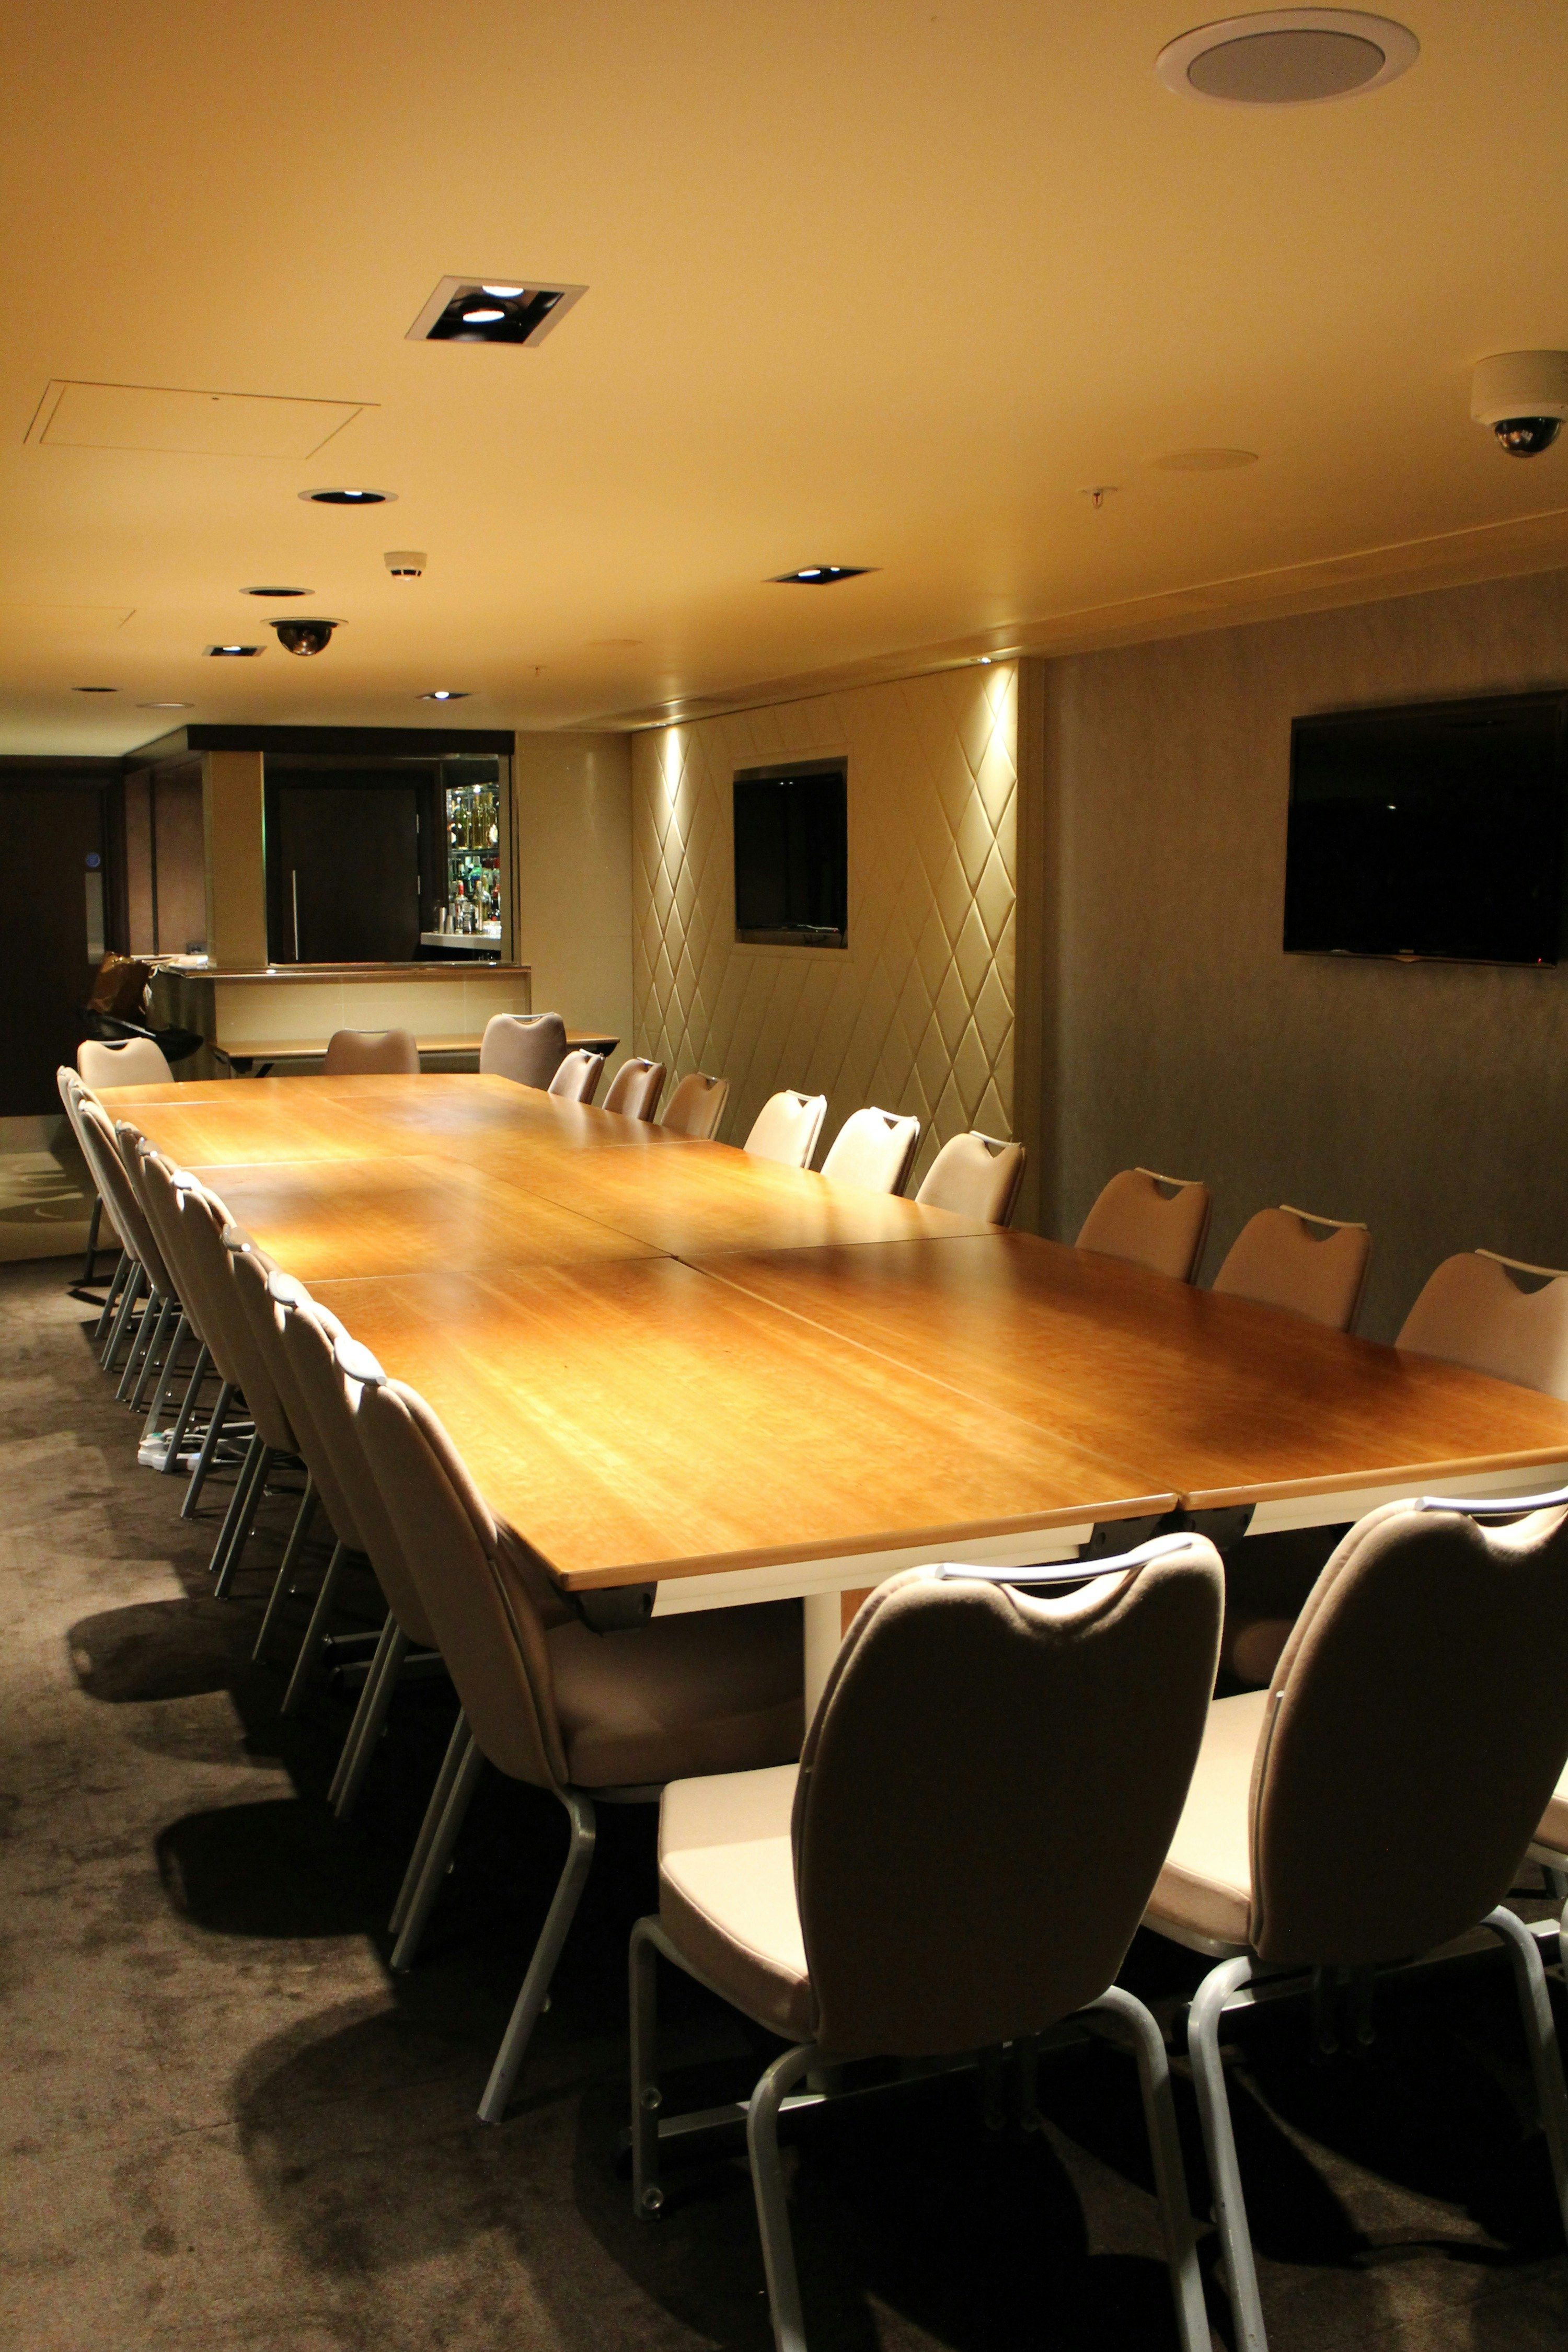 Presentation Venues in Manchester - Genting Club Manchester 